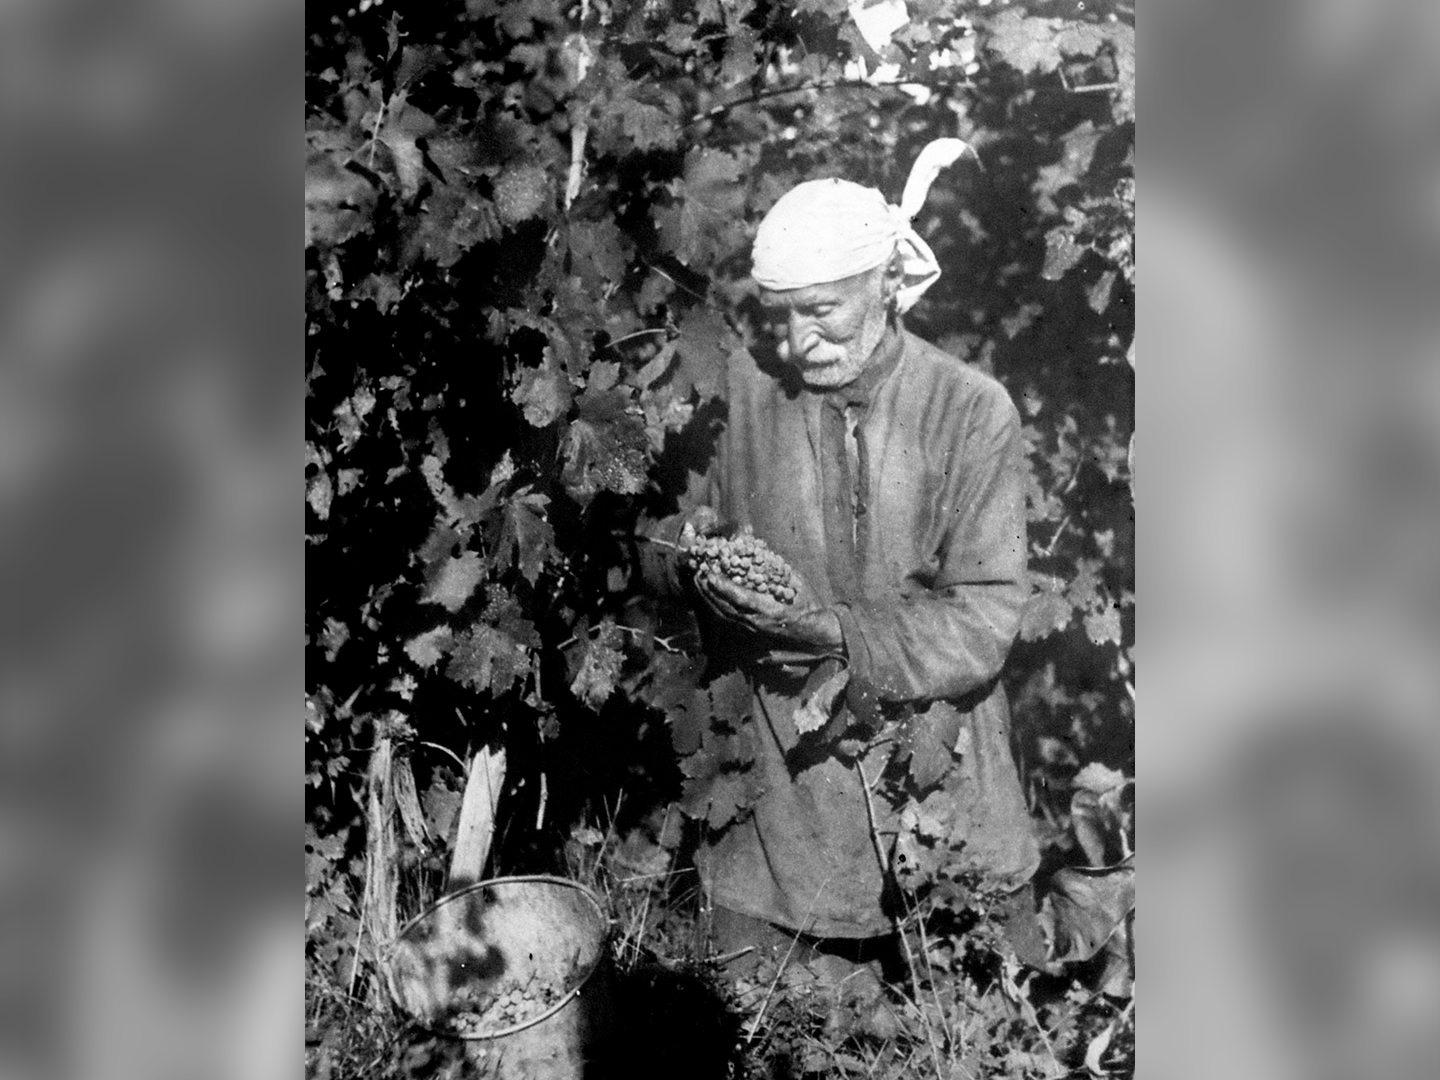 Avetissyan’s grandfather working the vineyard in Togh village